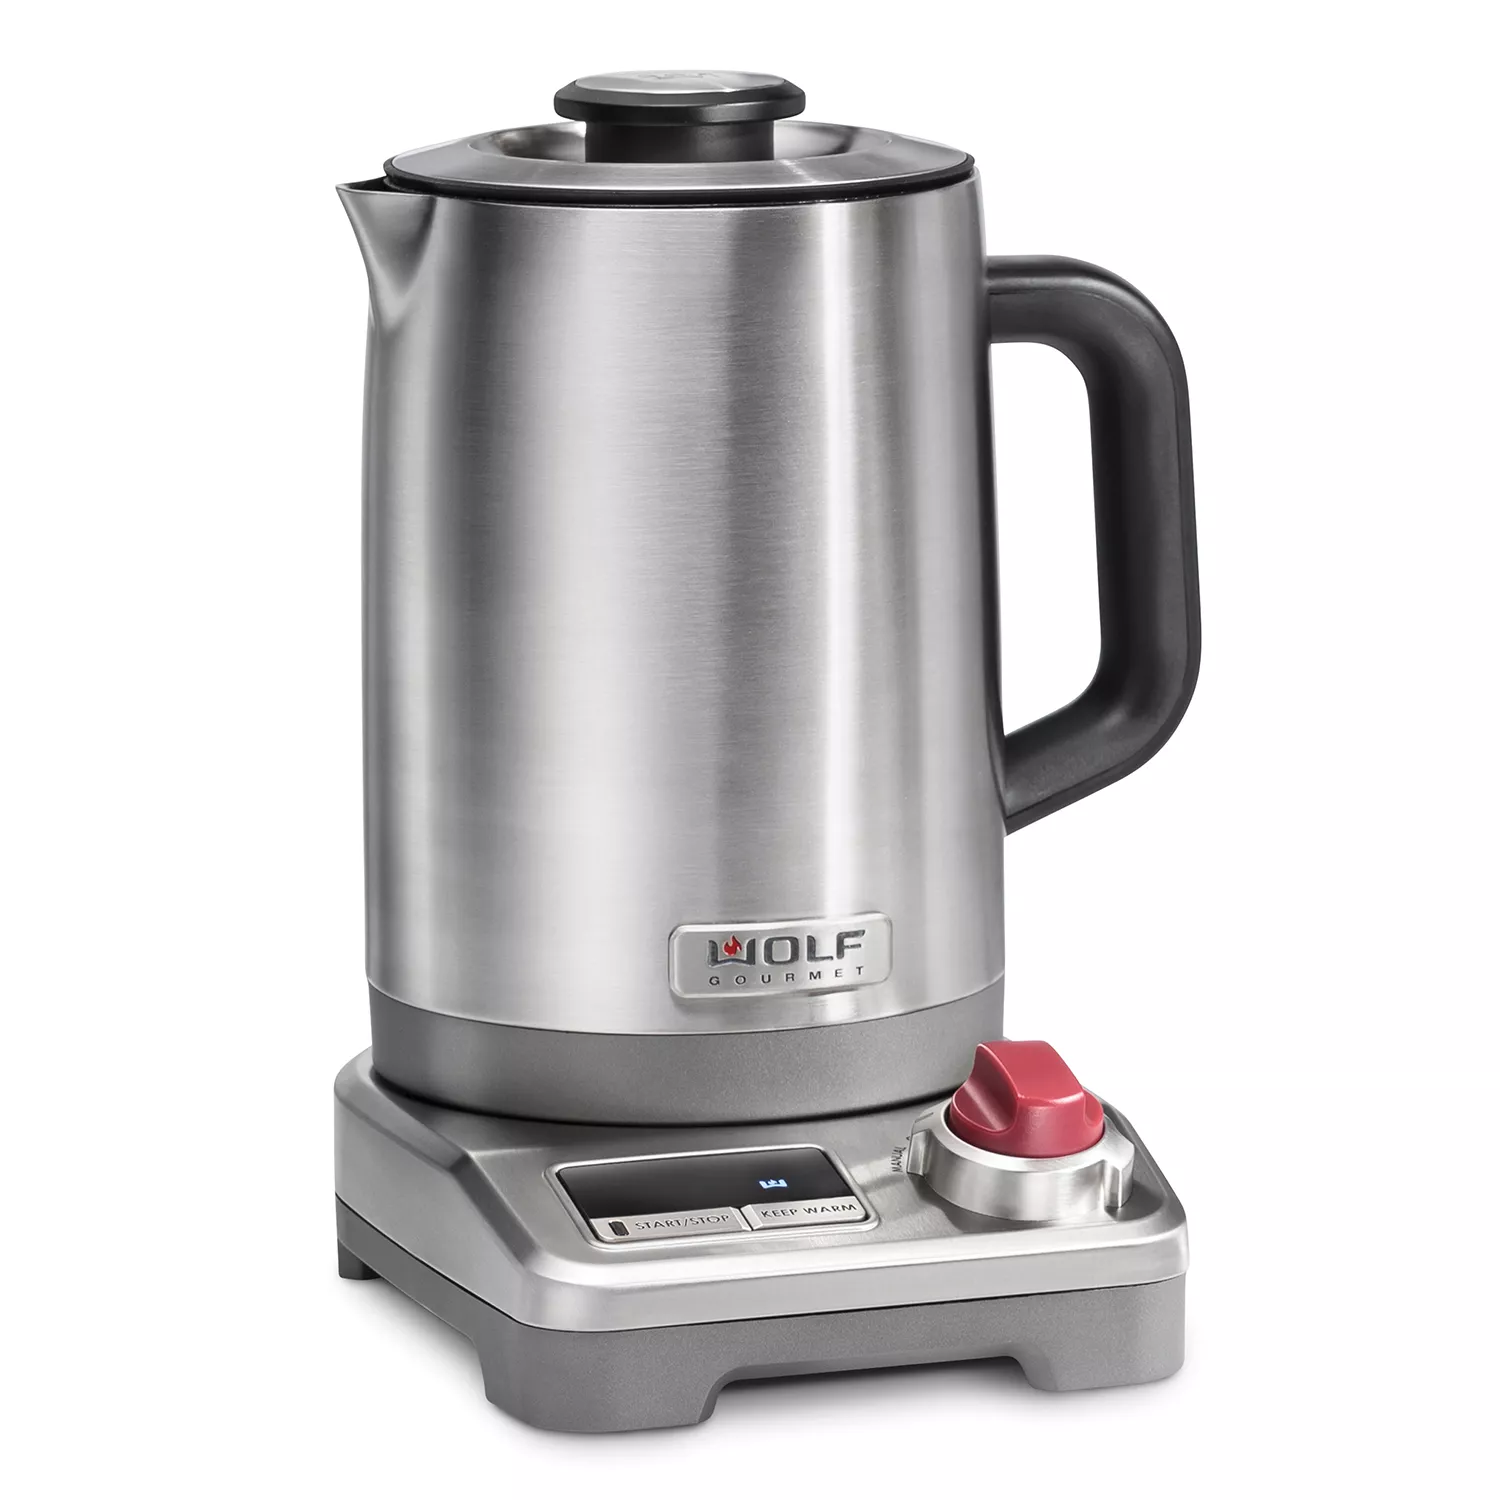 Dualit 1.7 Quarts Stainless Steel Electric Tea Kettle & Reviews